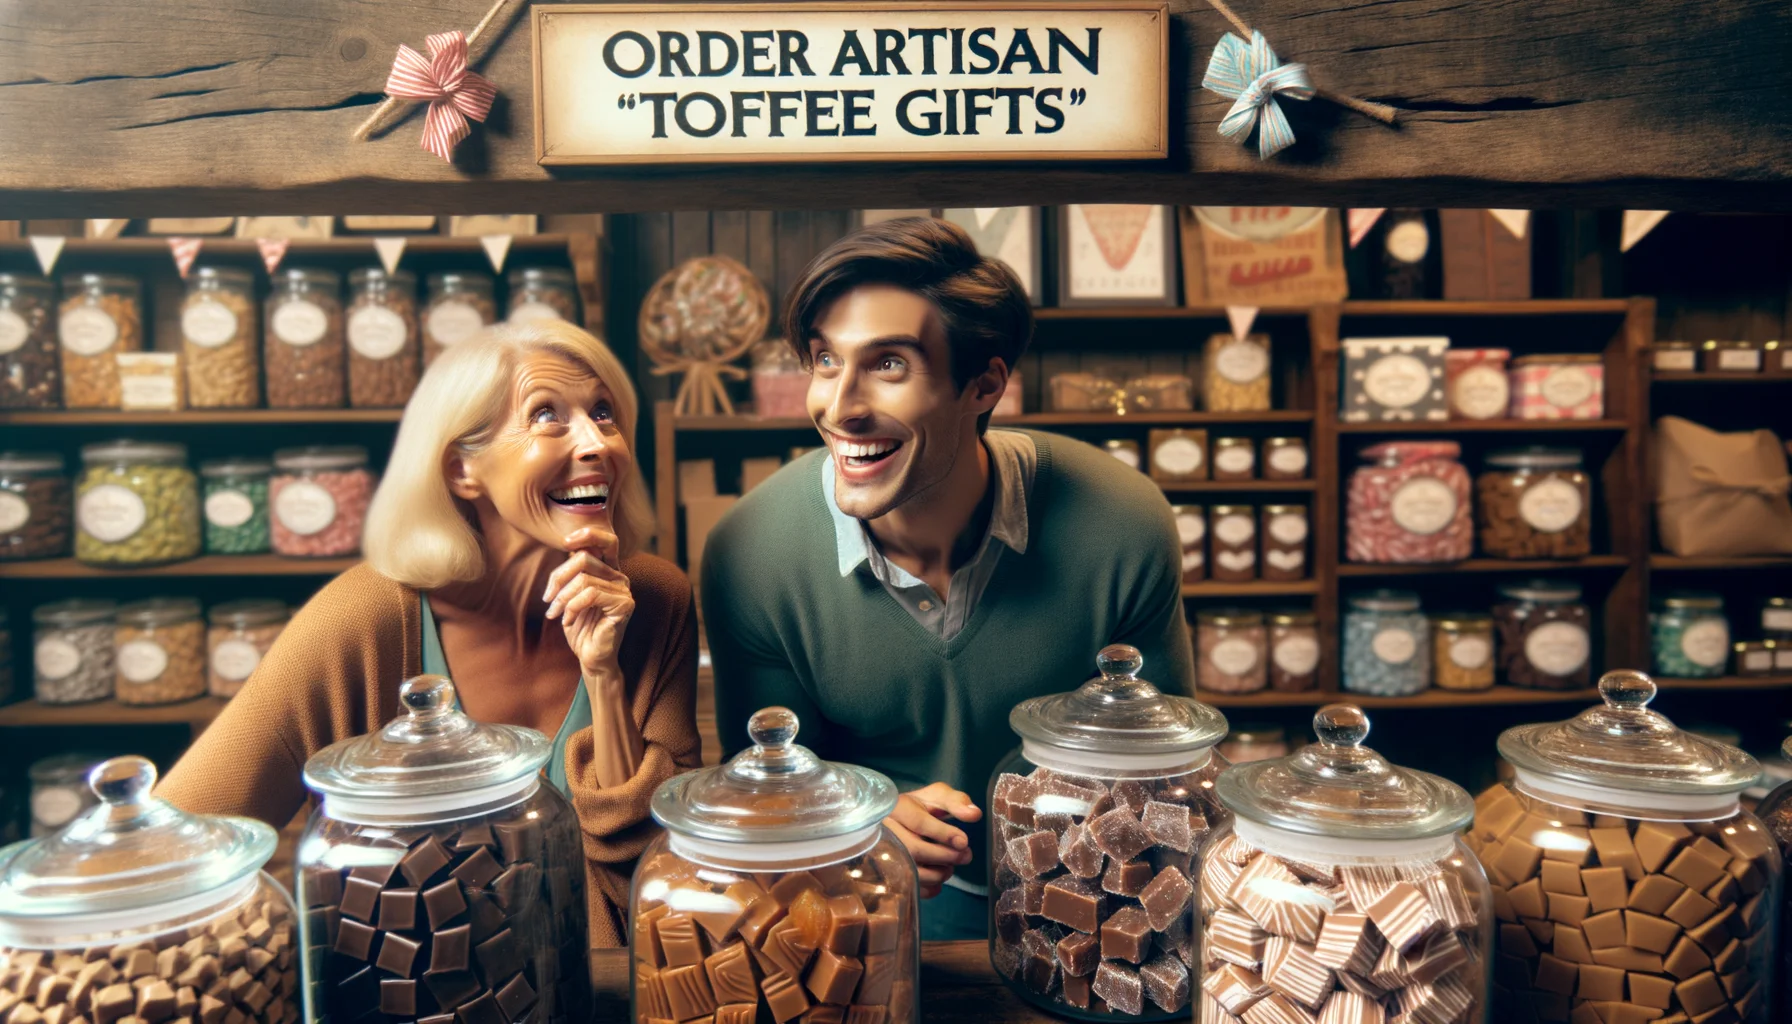 Create a humorous, lifelike image representing the perfect scenario for 'Order Artisan Toffee Gifts'. Picture an elegantly decorated candy store, with large, shimmery glass jars full of artisan toffee on the shelves. A radiant, excited middle-aged Caucasian woman and a cheerful young Hispanic man are seen browsing through the assortment, their eyes sparkling with anticipation. They are contemplating which ones to select for gifting. Just above them, playfully etched in the wooden beam, are the words 'Order Artisan Toffee Gifts'. The shop is filled with candy-themed decor, showcasing a festive and charming ambiance.